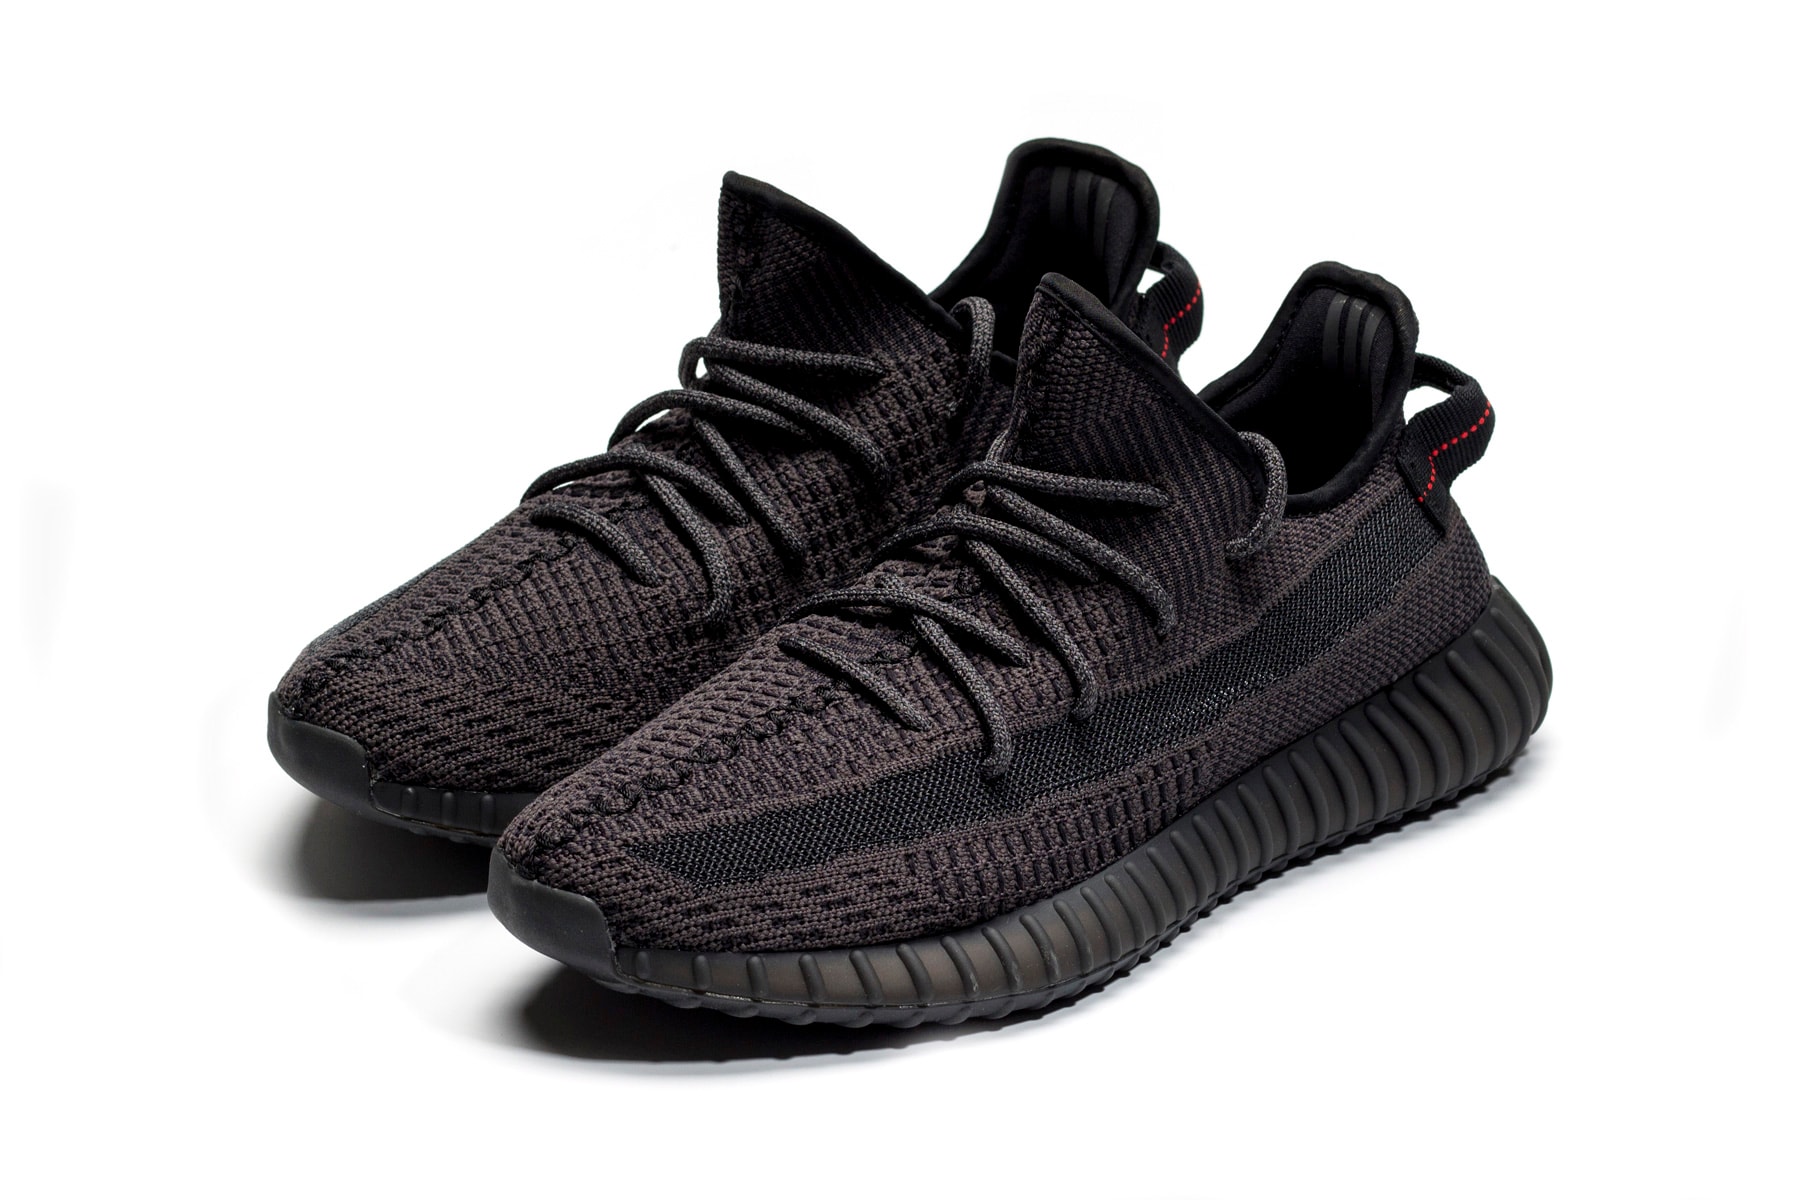 All-Black adidas YEEZY Boost 350 V2 First Look kanye west three stripes release date june